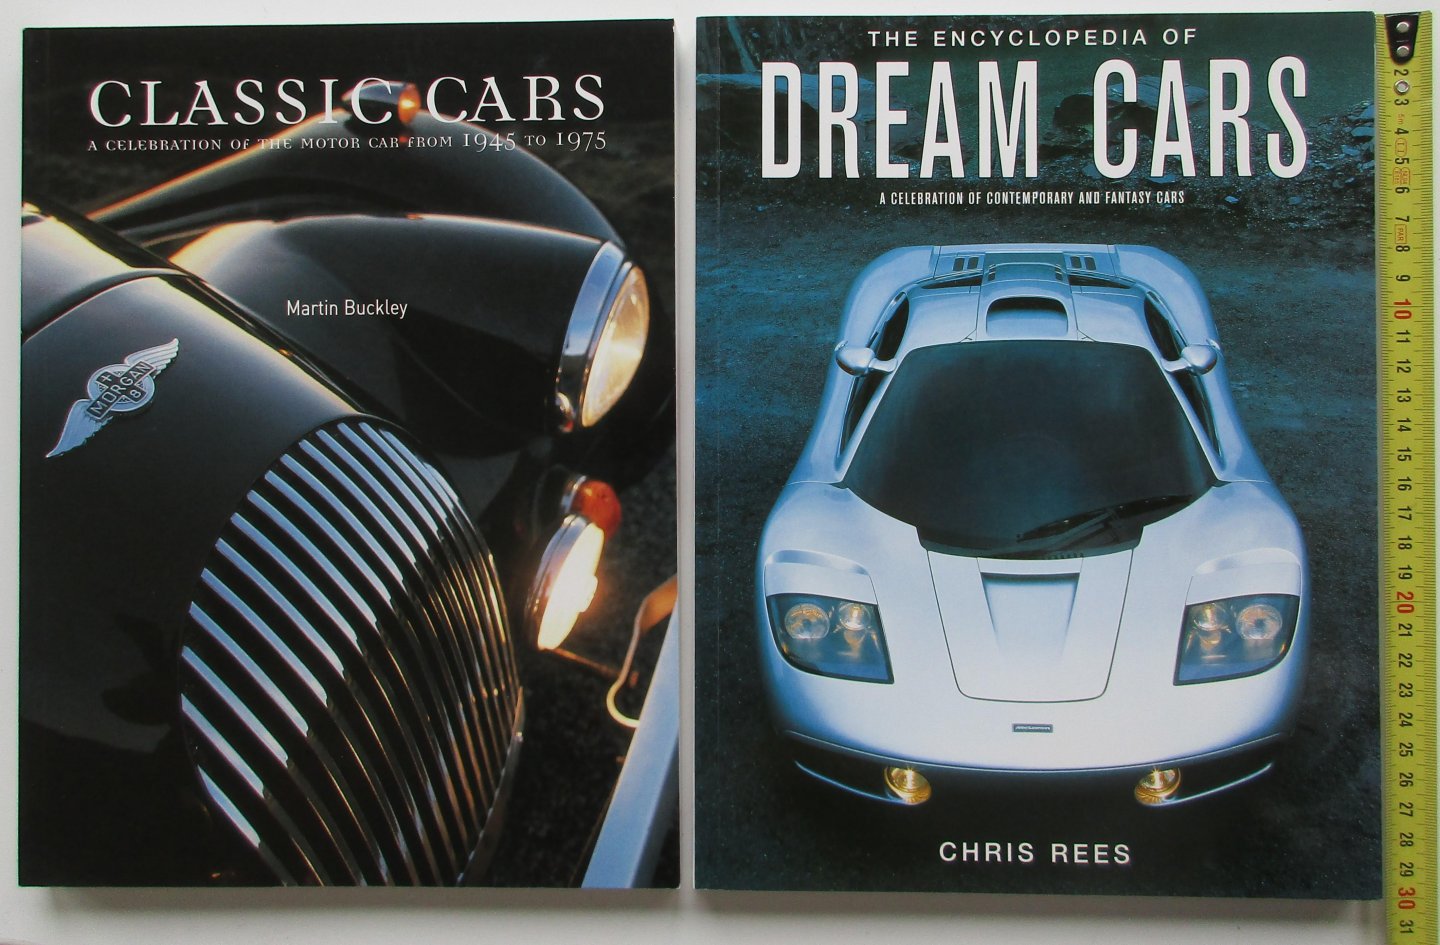 Buckley, Martin & Rees, Chris - Cars Classic collection